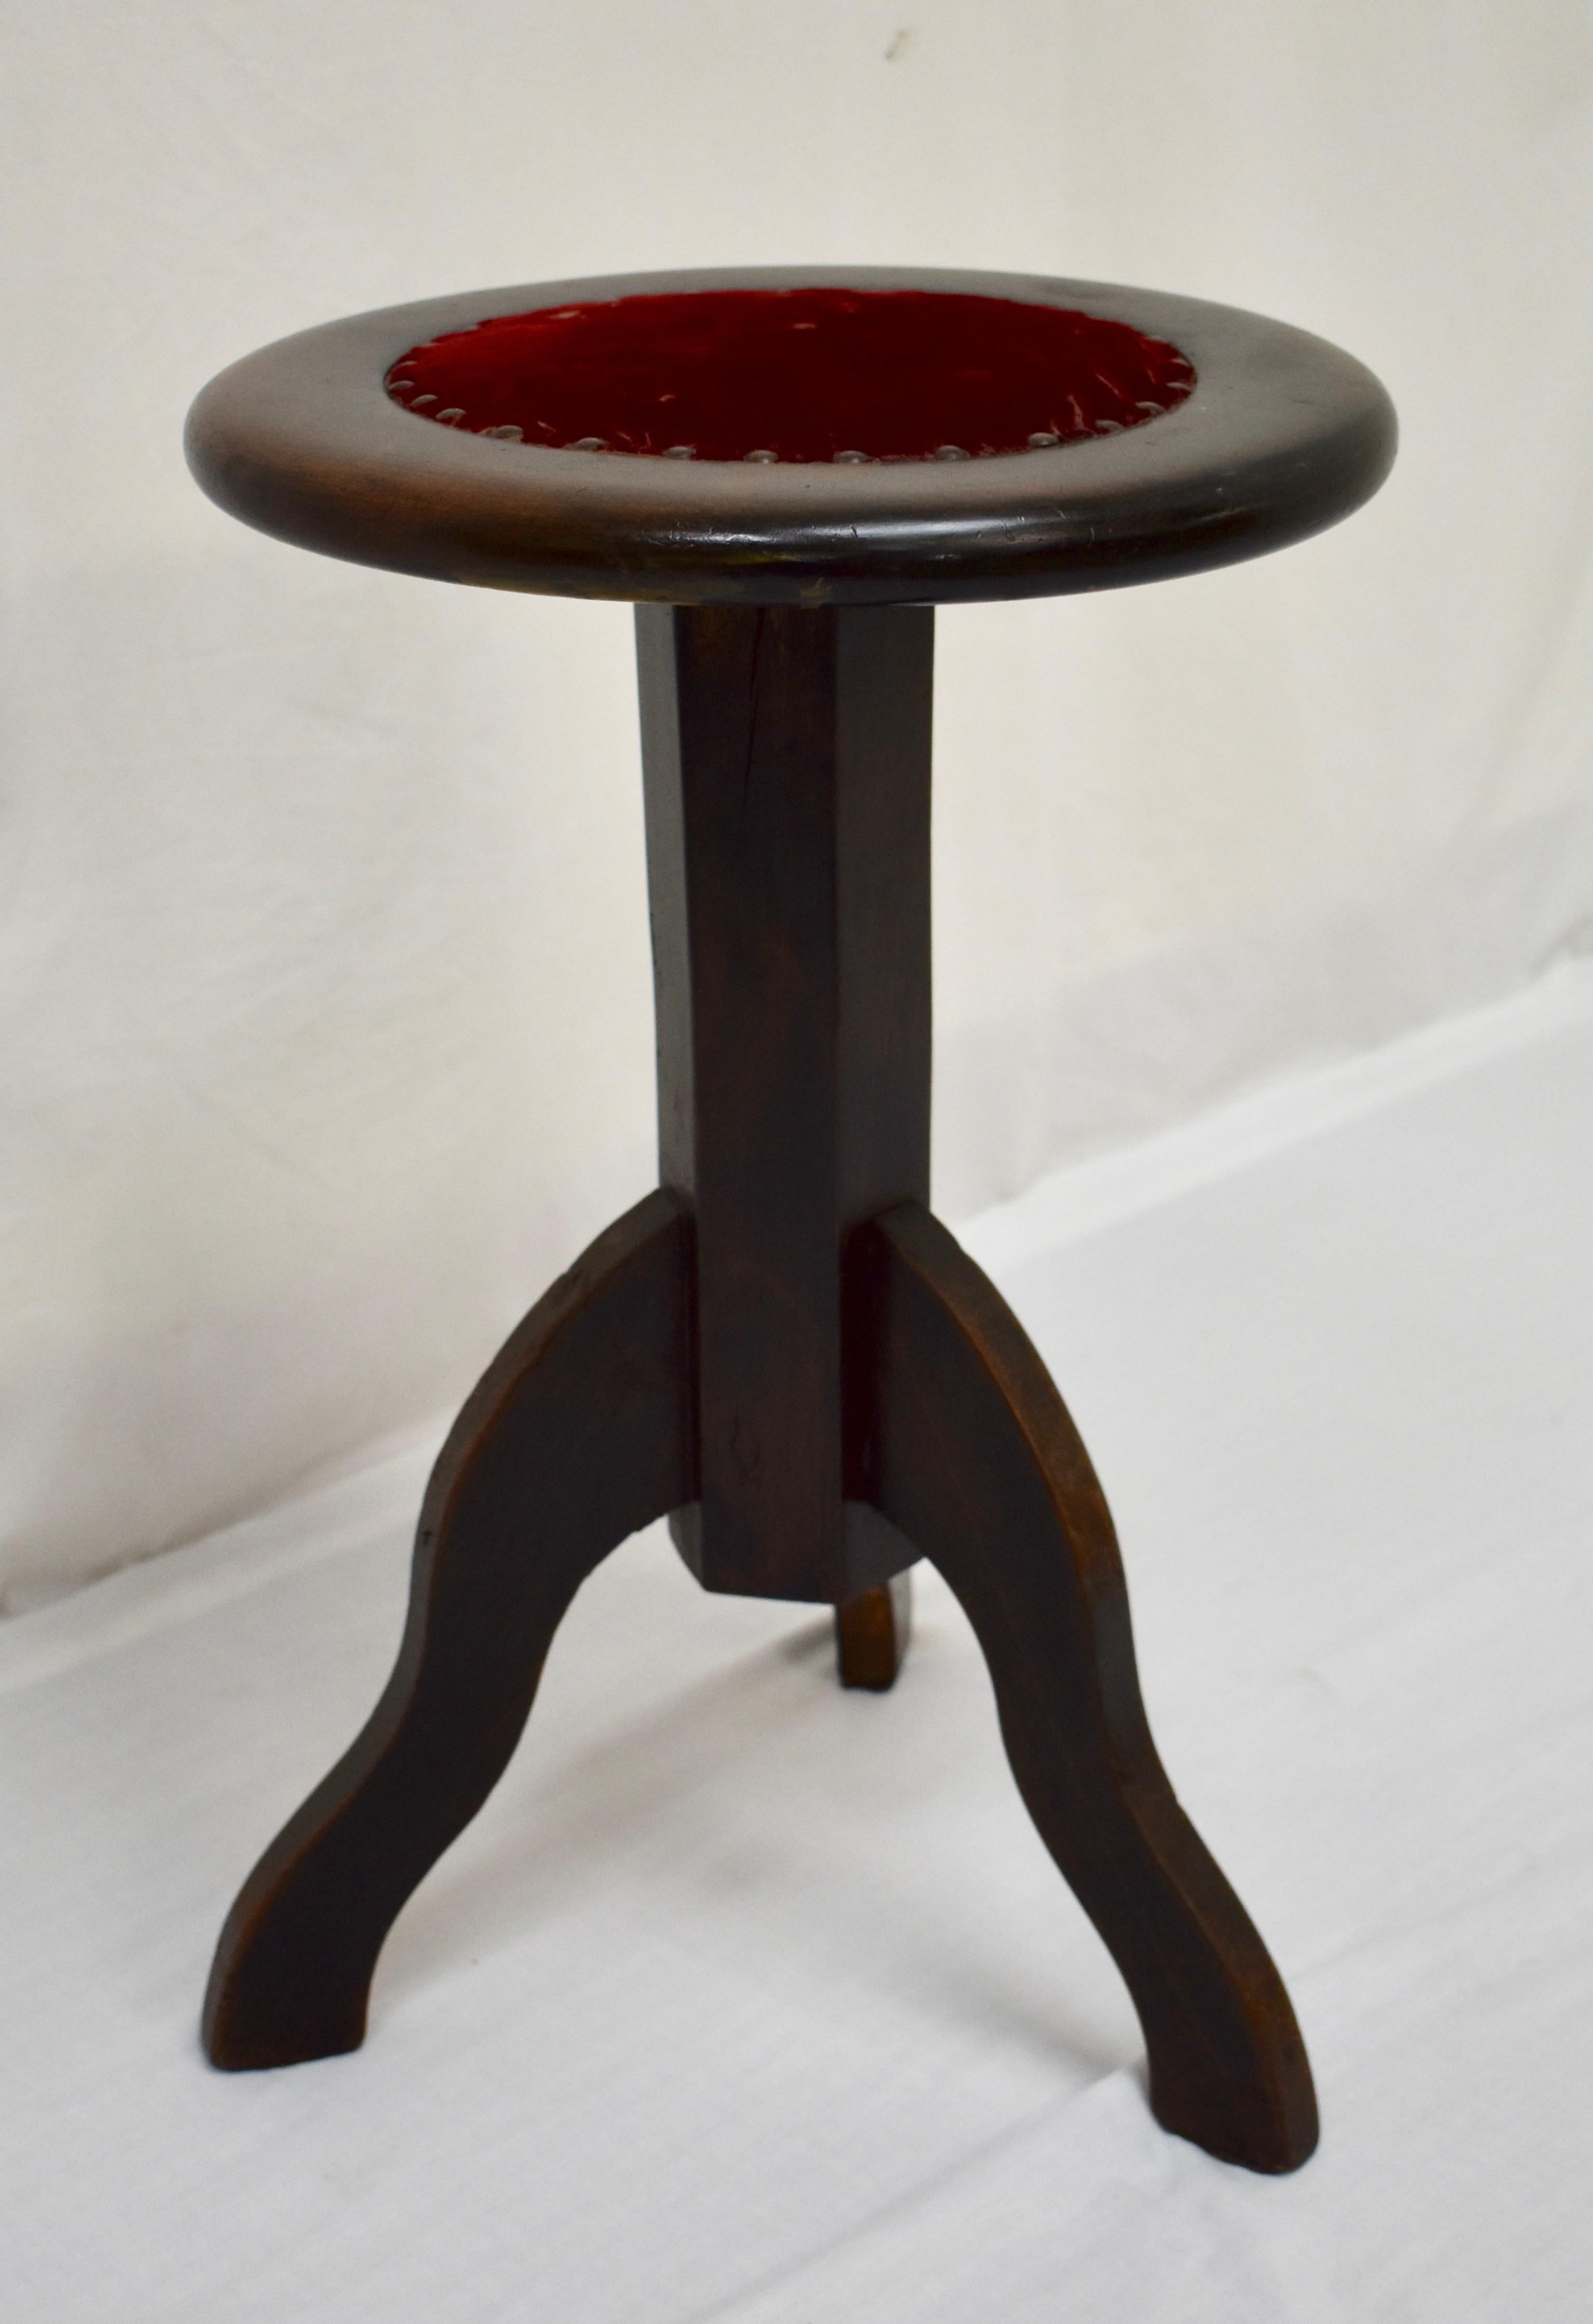 This sturdy tripod walnut stool has a generous seat with a worn red velvet insert. The base is a plain hexagonal column mounted on three wavy legs, the column concealing the iron screw thread which allows the seat to adjust to close to 30” (bar